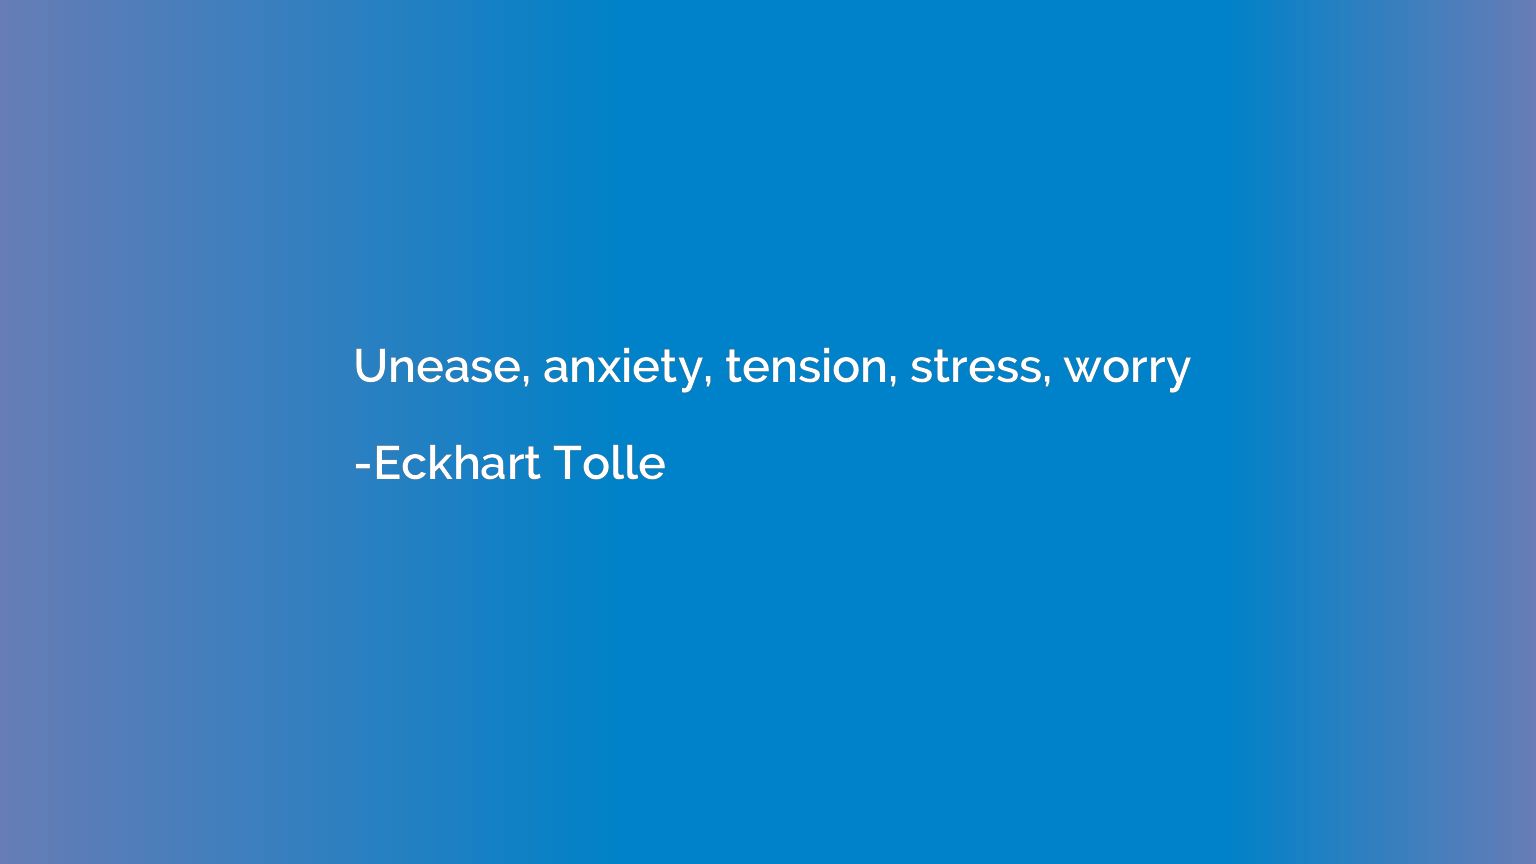 Unease, anxiety, tension, stress, worry